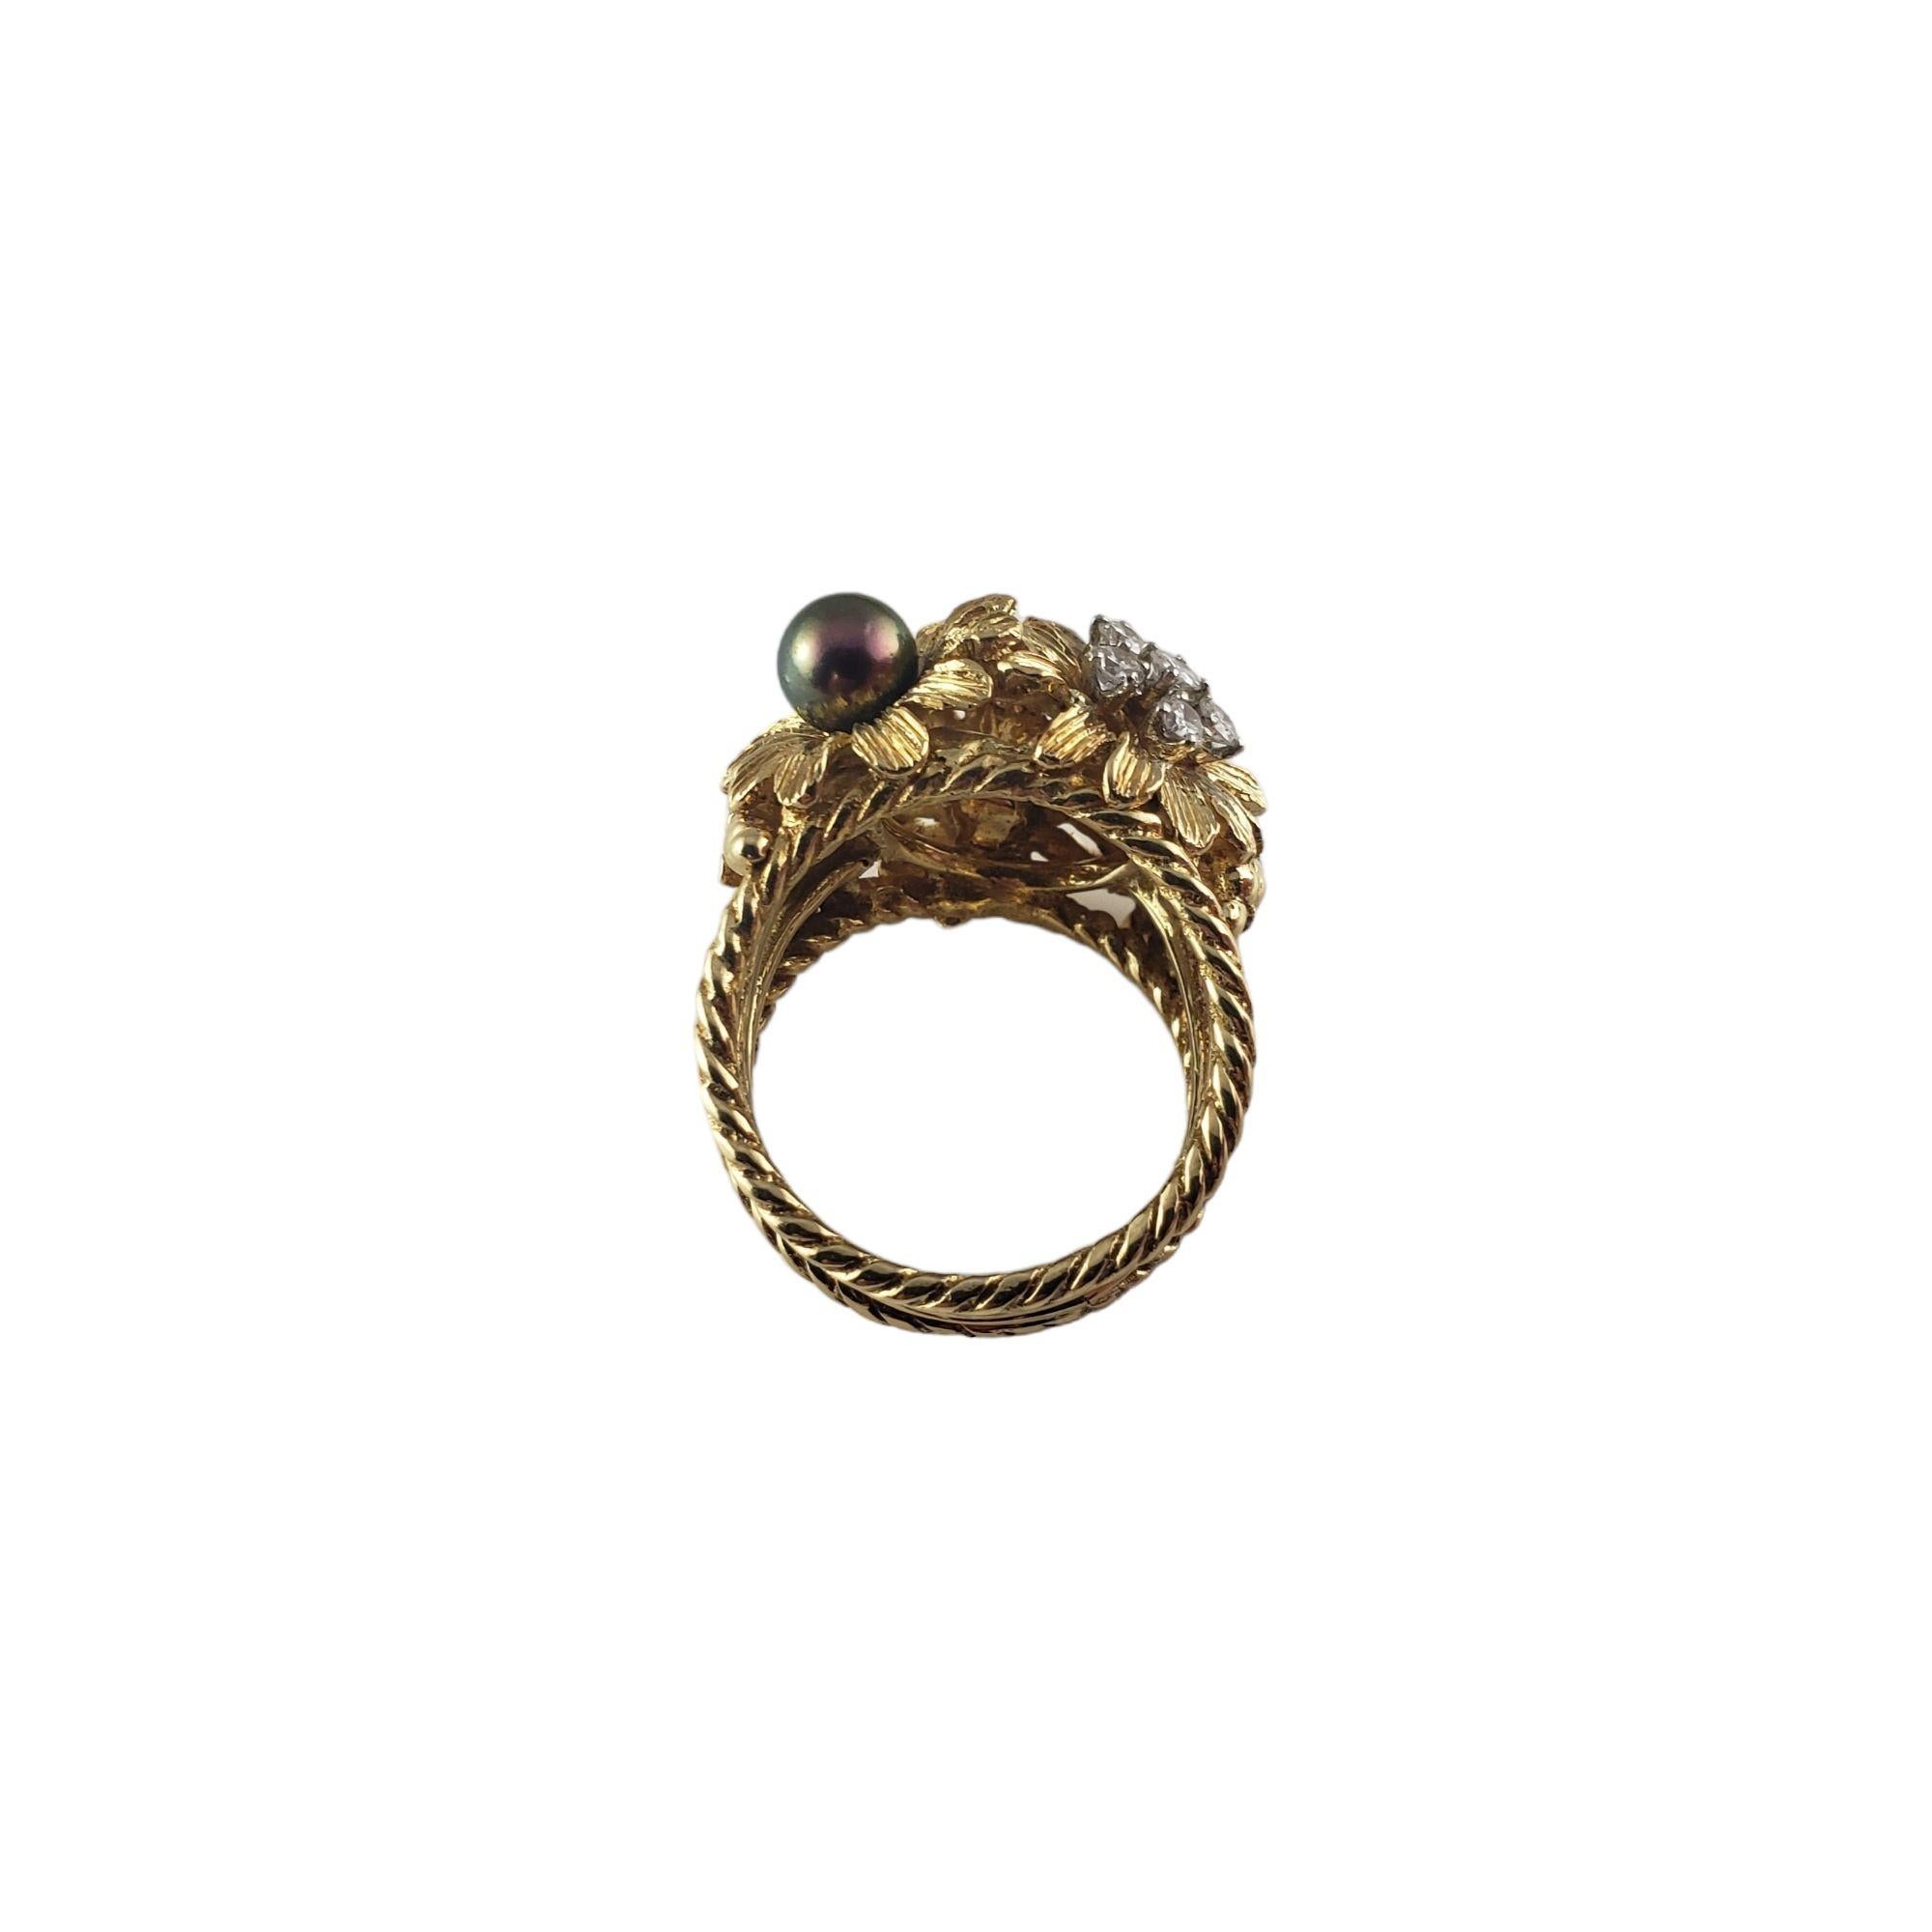 Vintage 18 Karat Yellow Gold Black and White Pearl and Diamond Flower Ring Size 8-

This stunning 18K yellow gold ring features two black pearls ( 6 mm and 4 mm), two white pearls (6 mm and 4 mm), and six round brilliant cut diamonds set in a